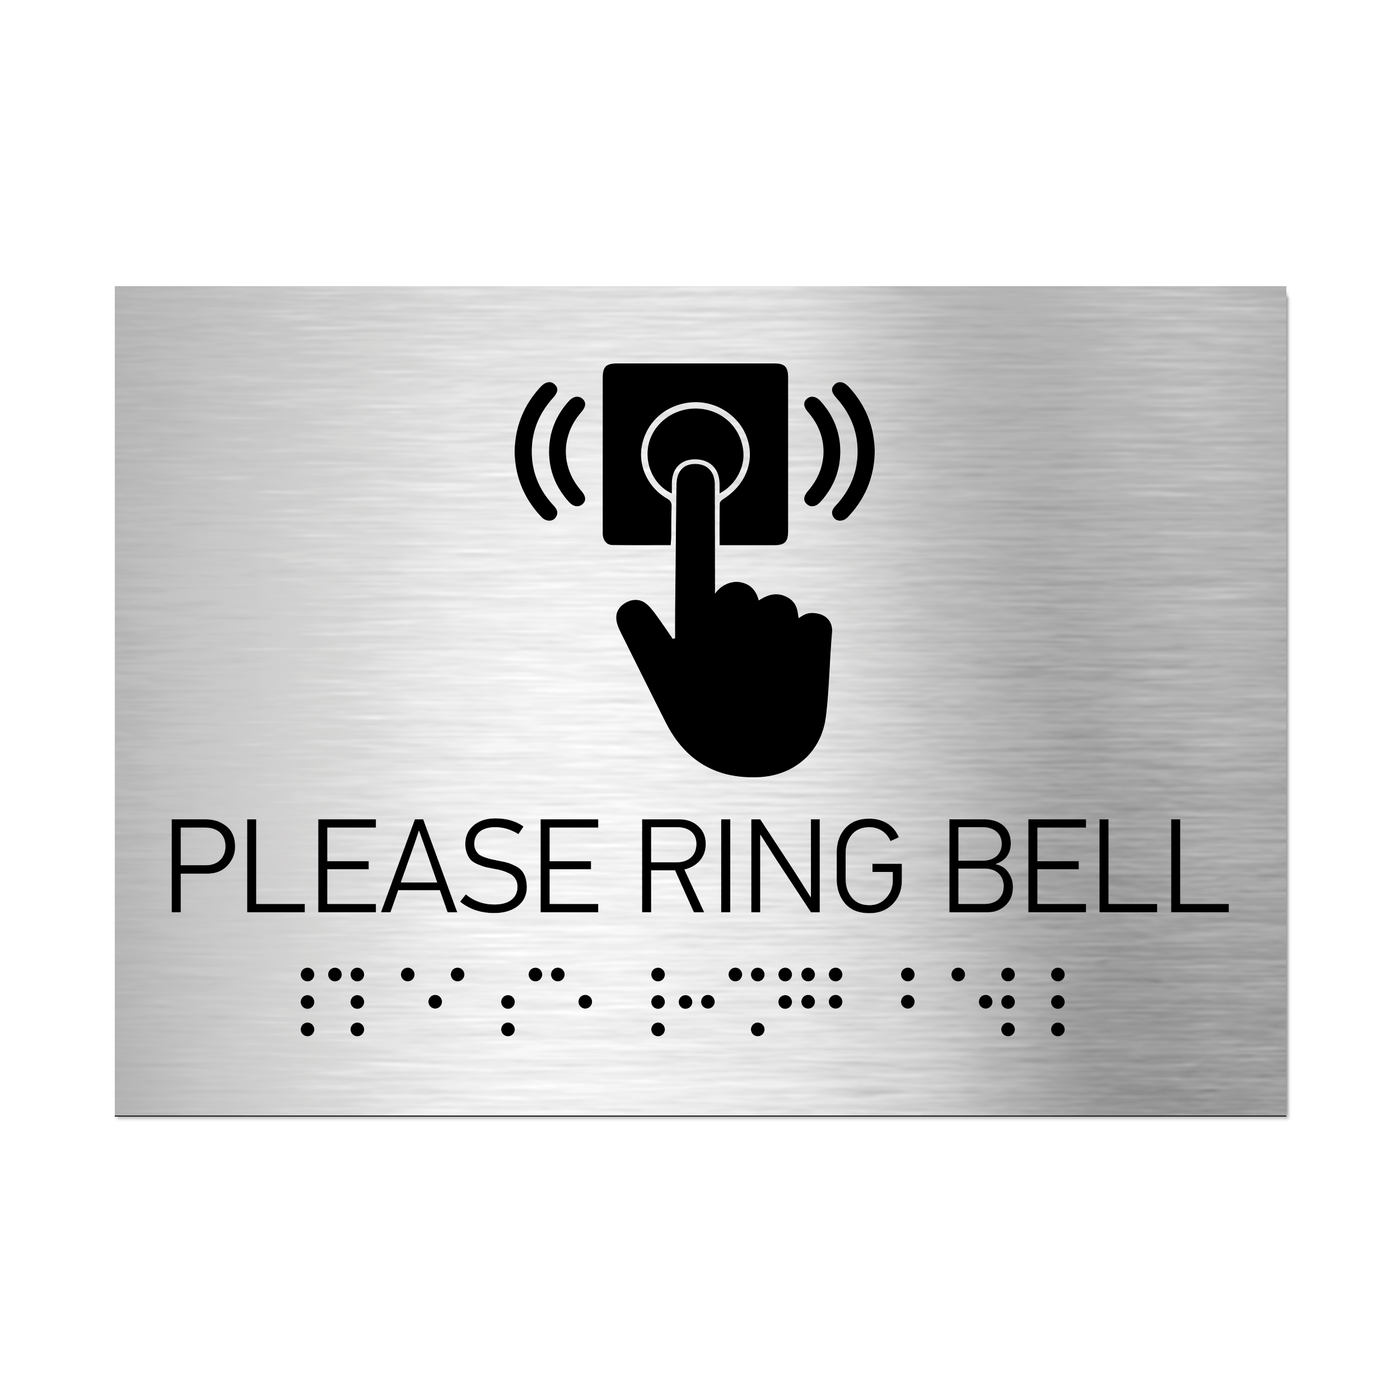 Information Signs - Please Ring Bell Sign Braille - Stainless Steel